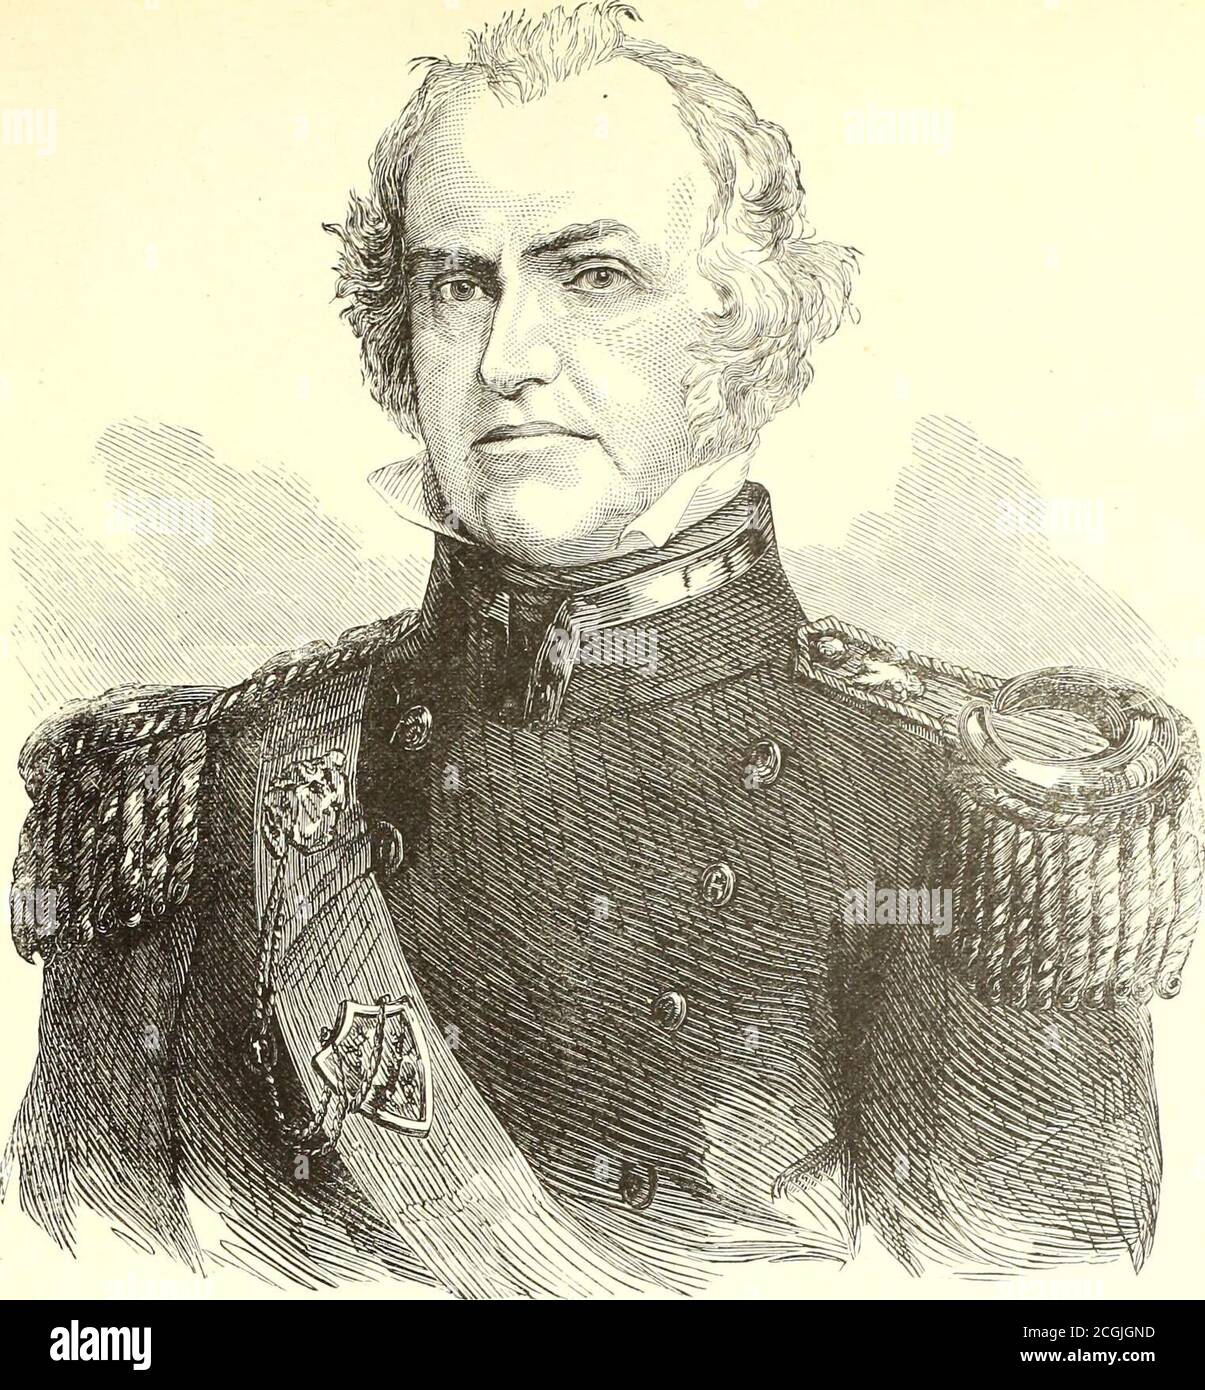 . Frank Leslie's scenes and portraits of the Civil War ... . GENERAL BEN McCULLOCH. GENERAL FRANZ SIGEL. General McCulloch was born in Butherford County, Tenn., in 1814.When the Mexican War broke out he took command of a band of Texans.He distinguished himself at the battles of Monterey and Buena Vista. Atthe breaking out of the Civil War, McCulloch raised a regiment ofdesperadoes and called them the Texan Eangers. He was fatally wounded 8while leading his division at the battle of Pea Eidge. General Sigel was born at Zinsheim, Bavaria, November 18th, 1824;entered the army of the Grand Duke of Stock Photo